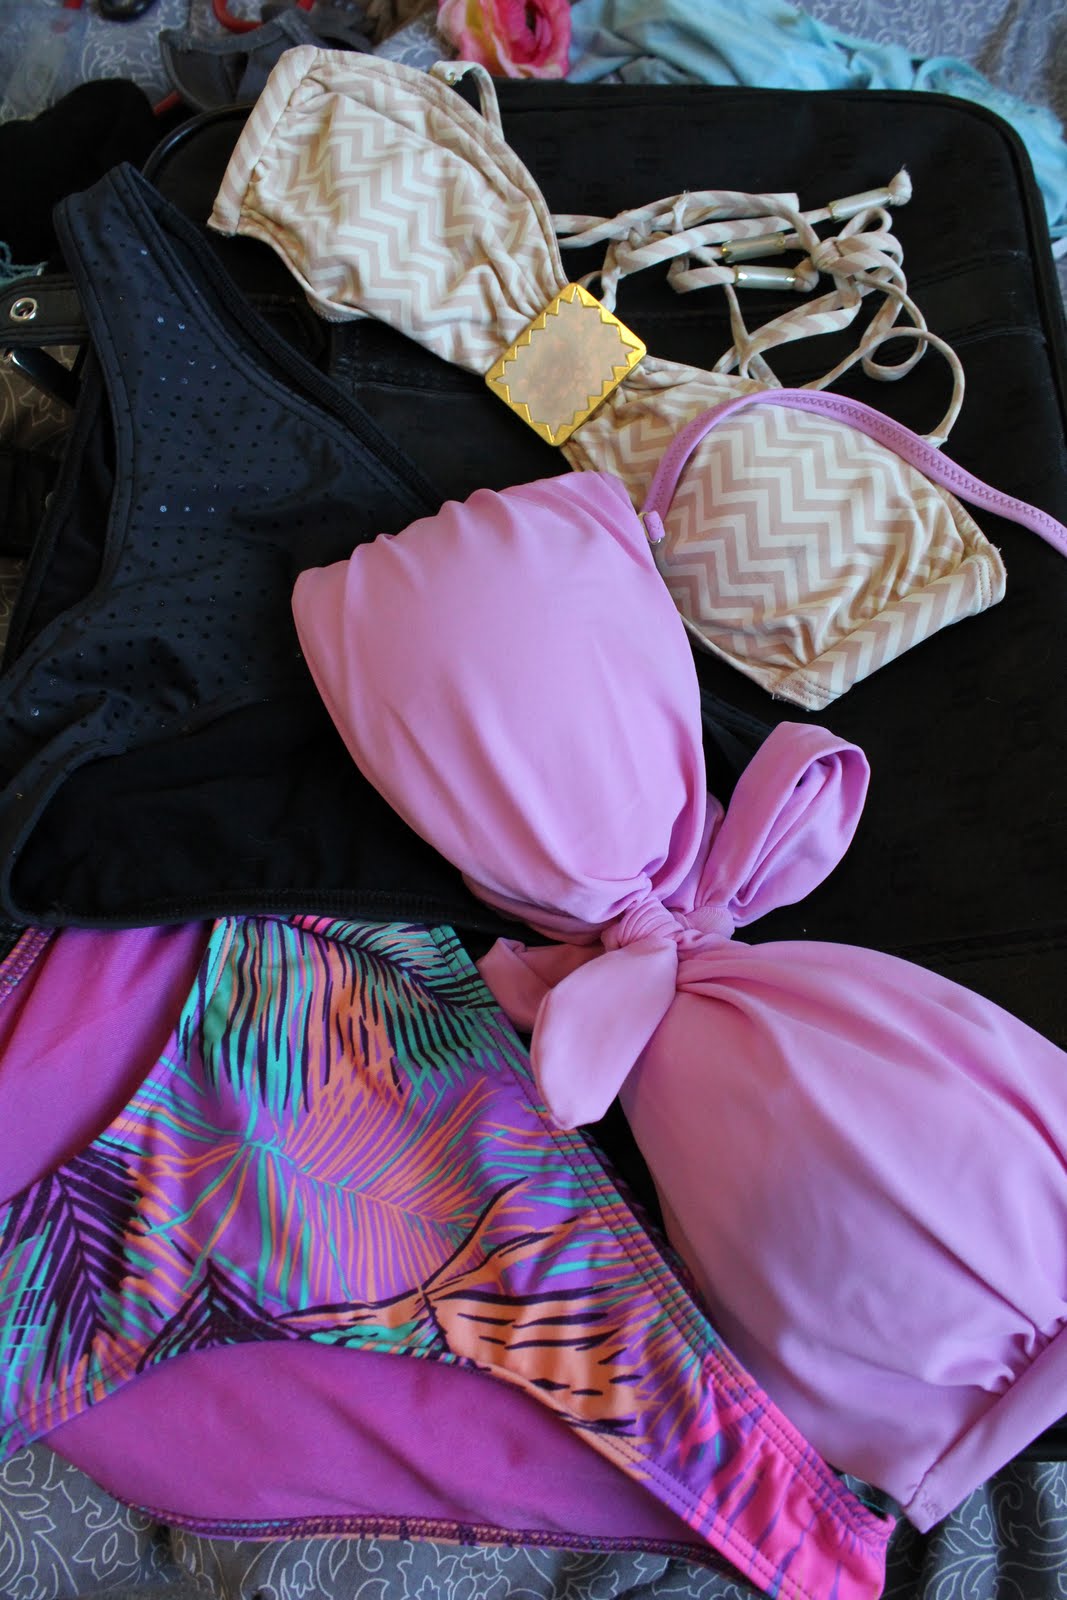 FASHION IN OSLO: Packing for sea and summer